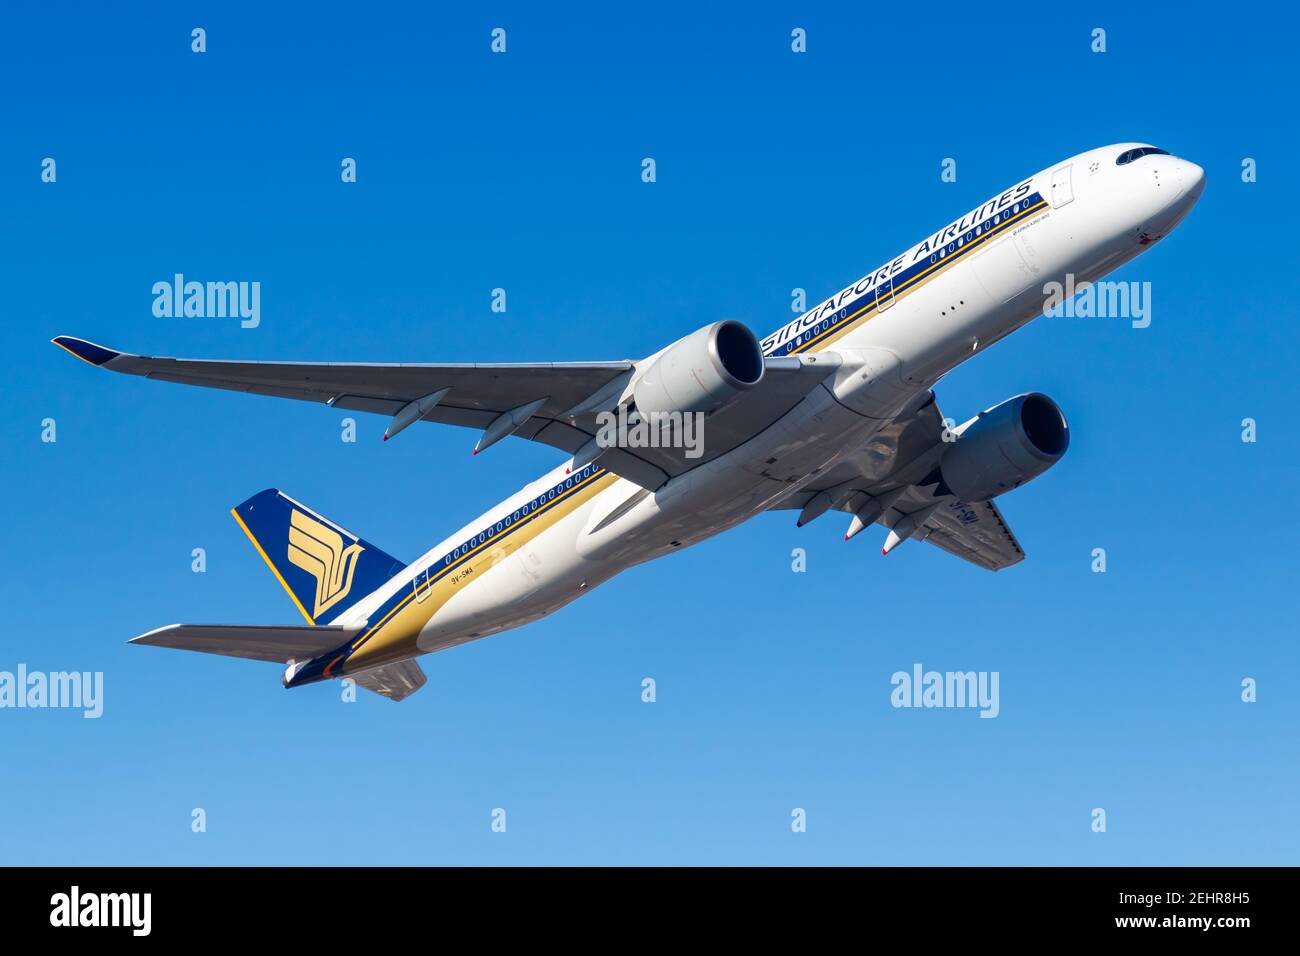 Frankfurt, Germany - February 13, 2021: Singapore Airlines Airbus A350-900 airplane at Frankfurt Airport (FRA) in Germany. Stock Photo